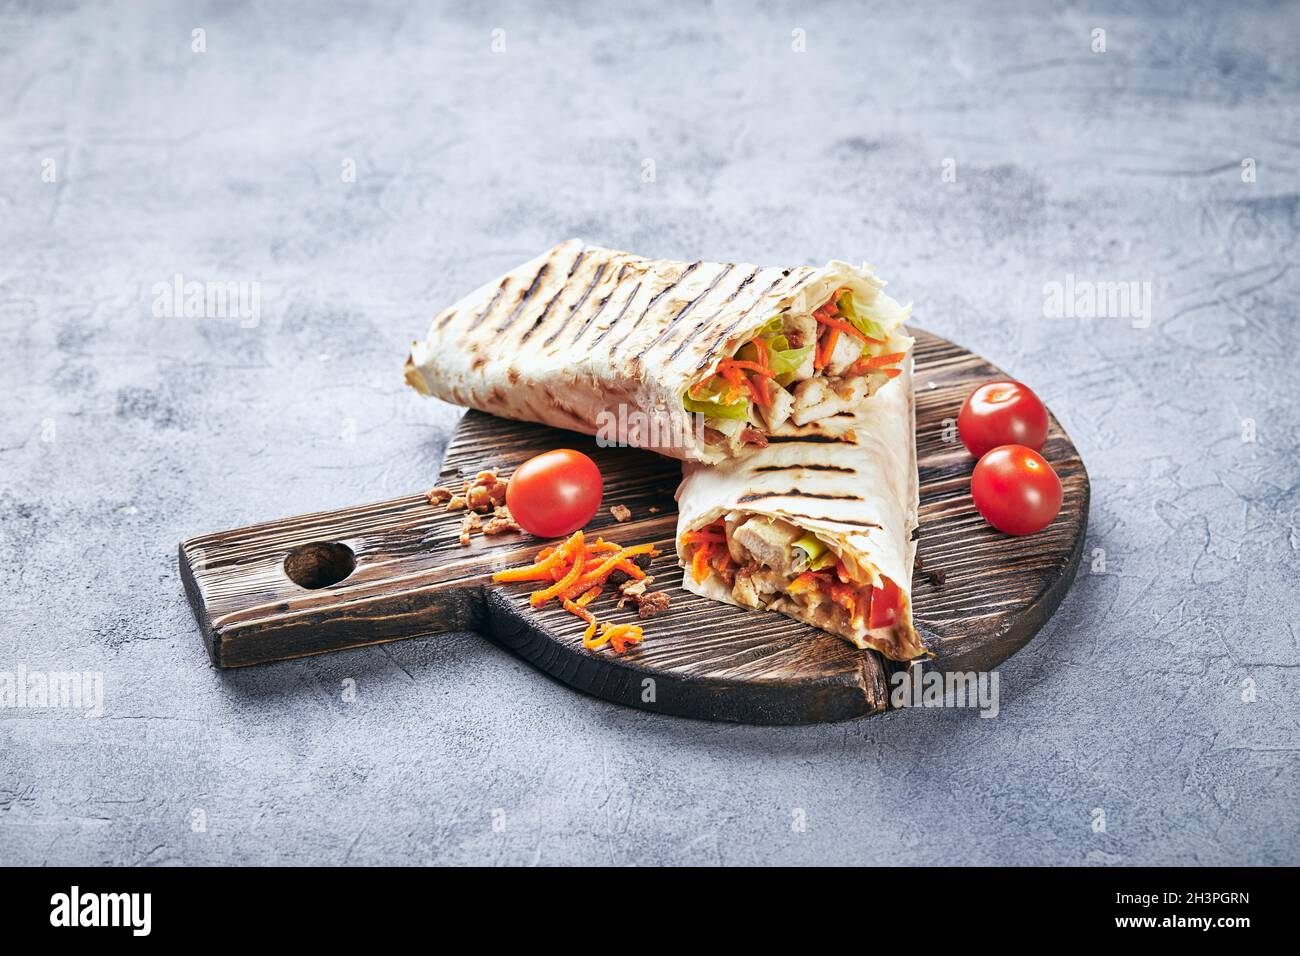 Eastern traditional shawarma with chicken and vegetables, Doner Kebab with sauces on wooden cutting board. Stock Photo